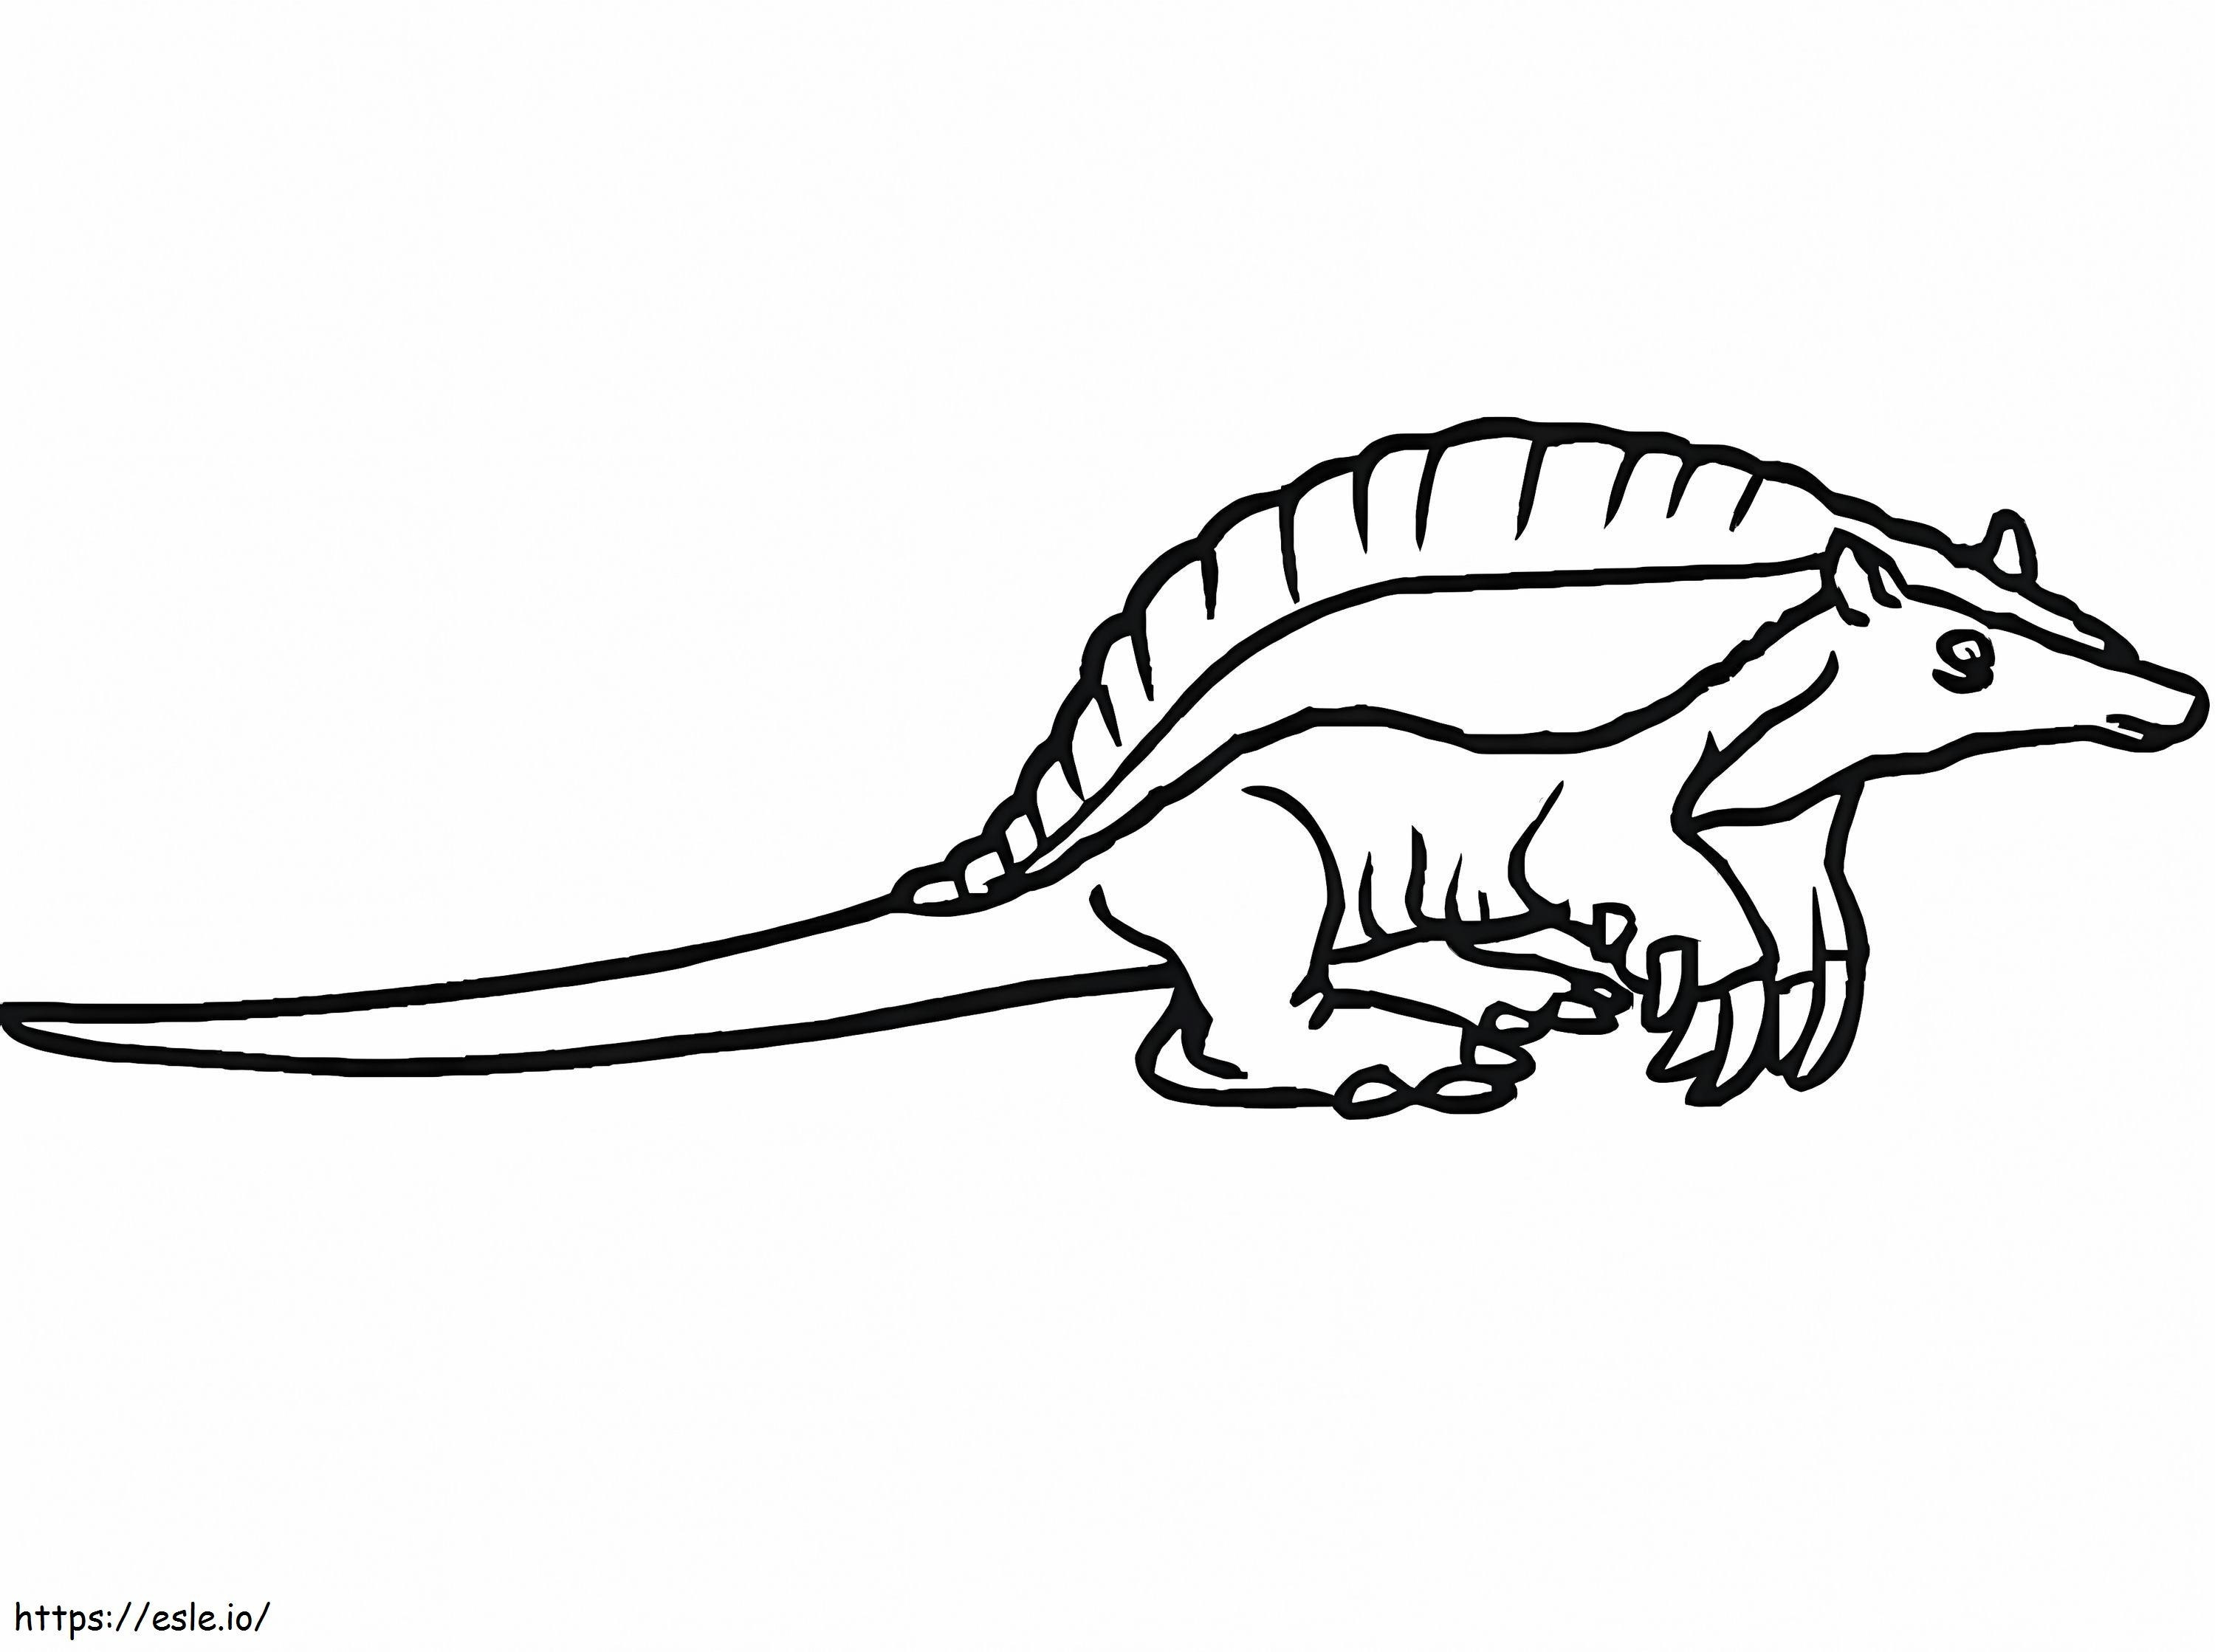 Little Armadillo coloring page